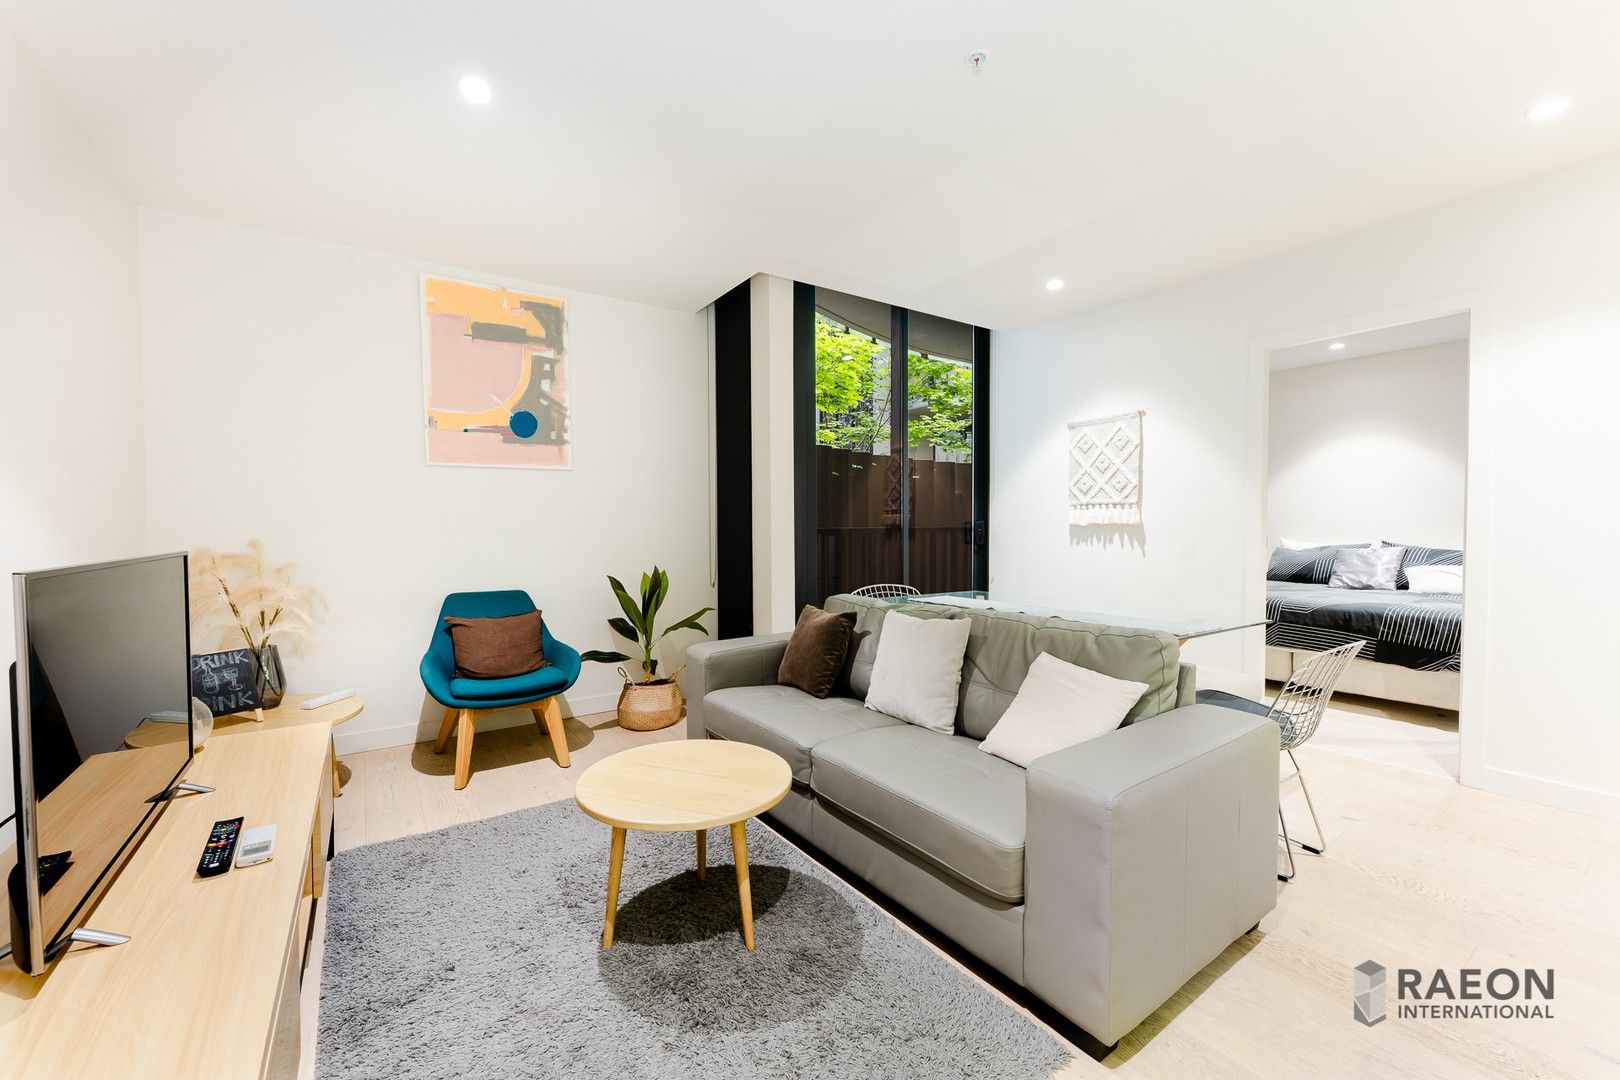 2 bedrooms Apartment / Unit / Flat in G6/140 Dudley Street WEST MELBOURNE VIC, 3003